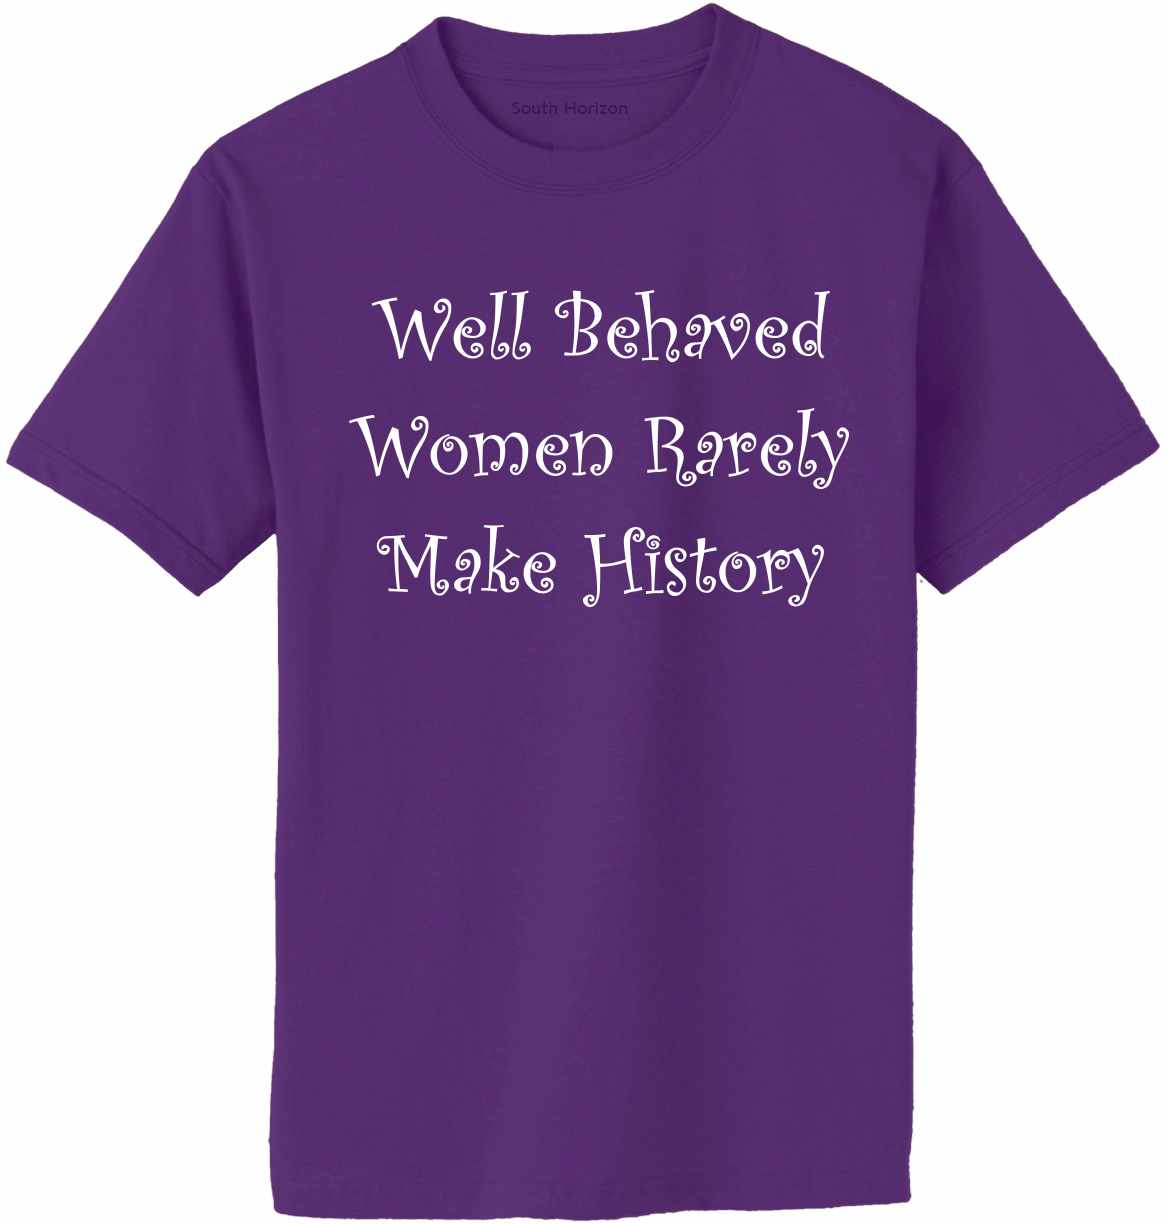 Well Behaved Women Rarely Make History Adult T-Shirt